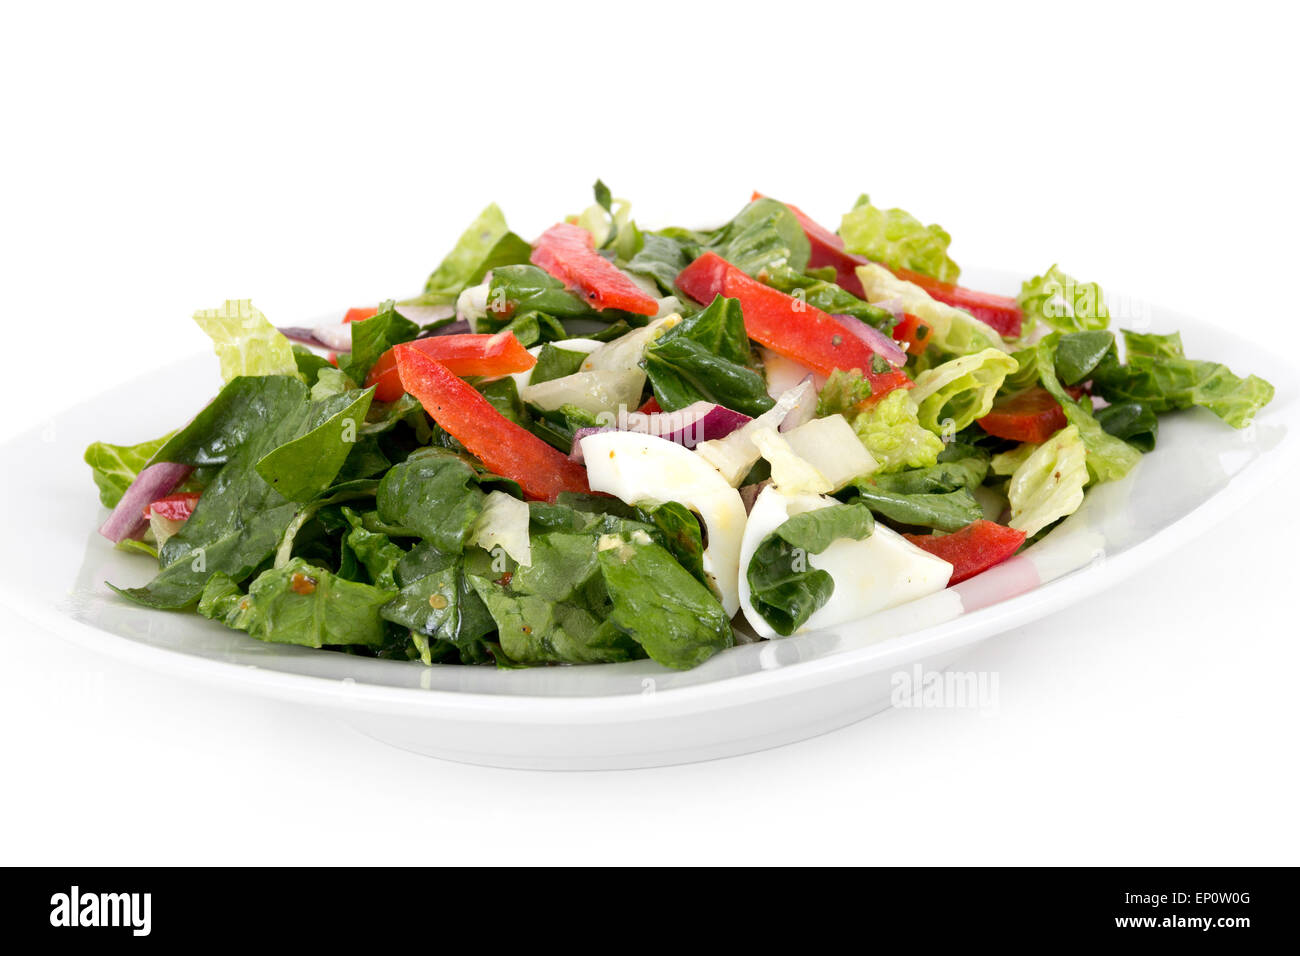 Egg and vegetables healthy organic salad over white background Stock Photo